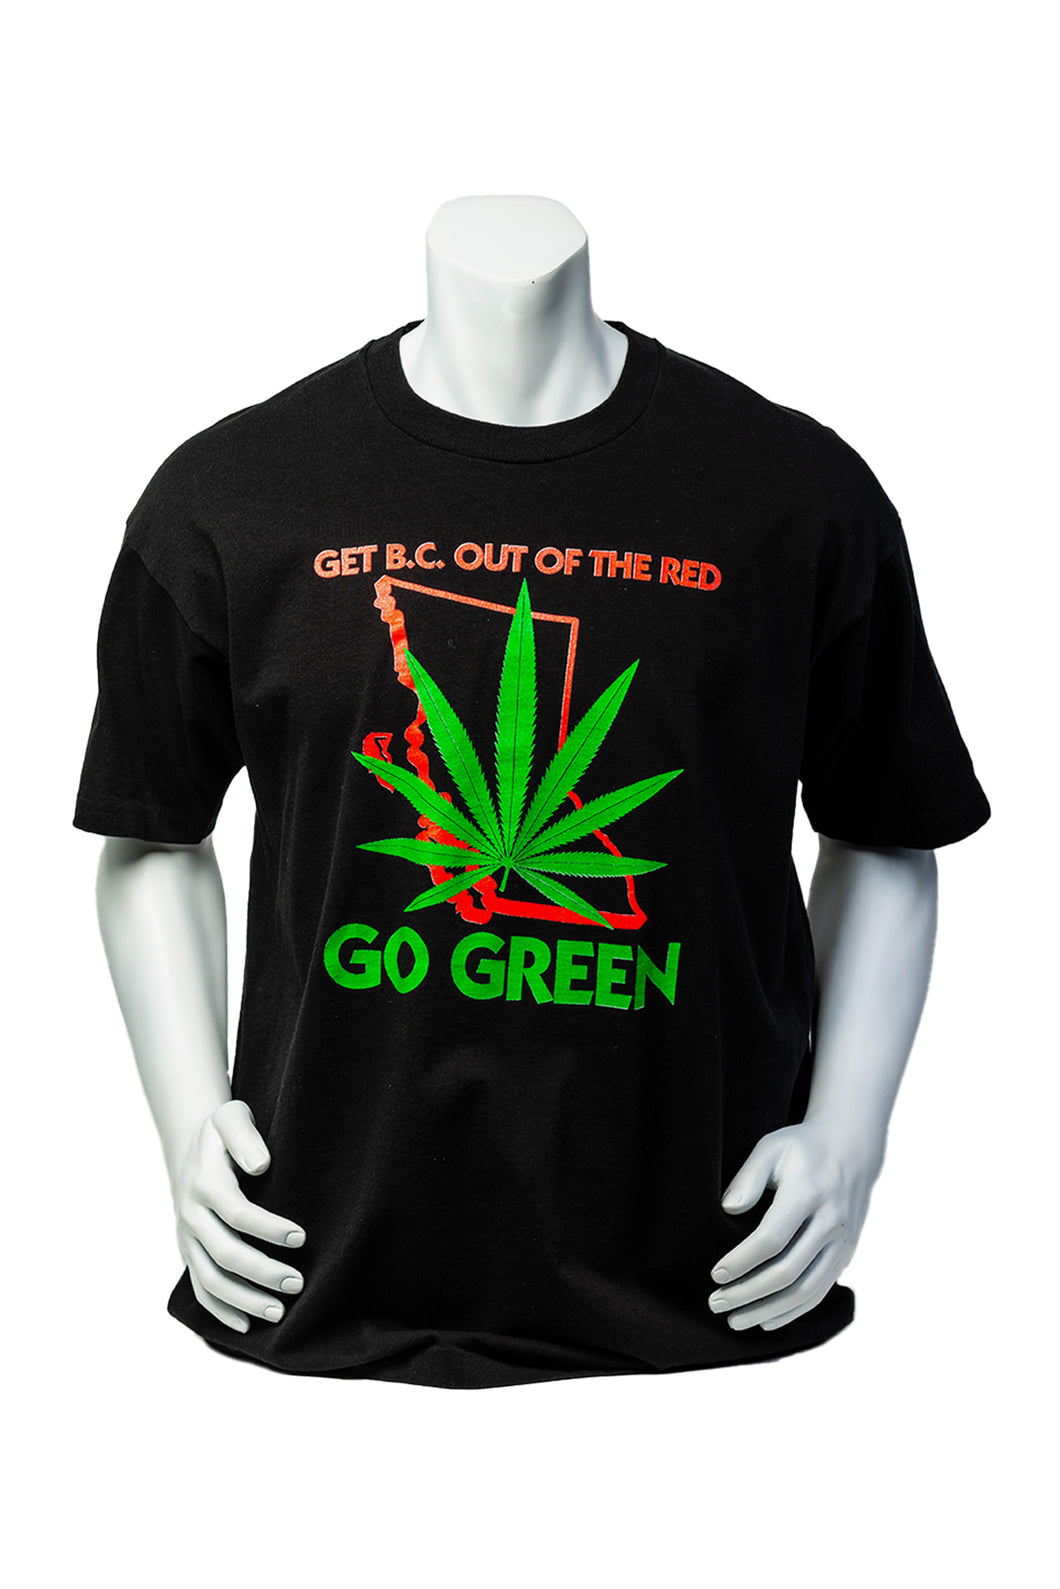 Vintage 90's Get BC Out of the Red... Go Green Pot Activist Single Stitch T-Shirt Men's XL